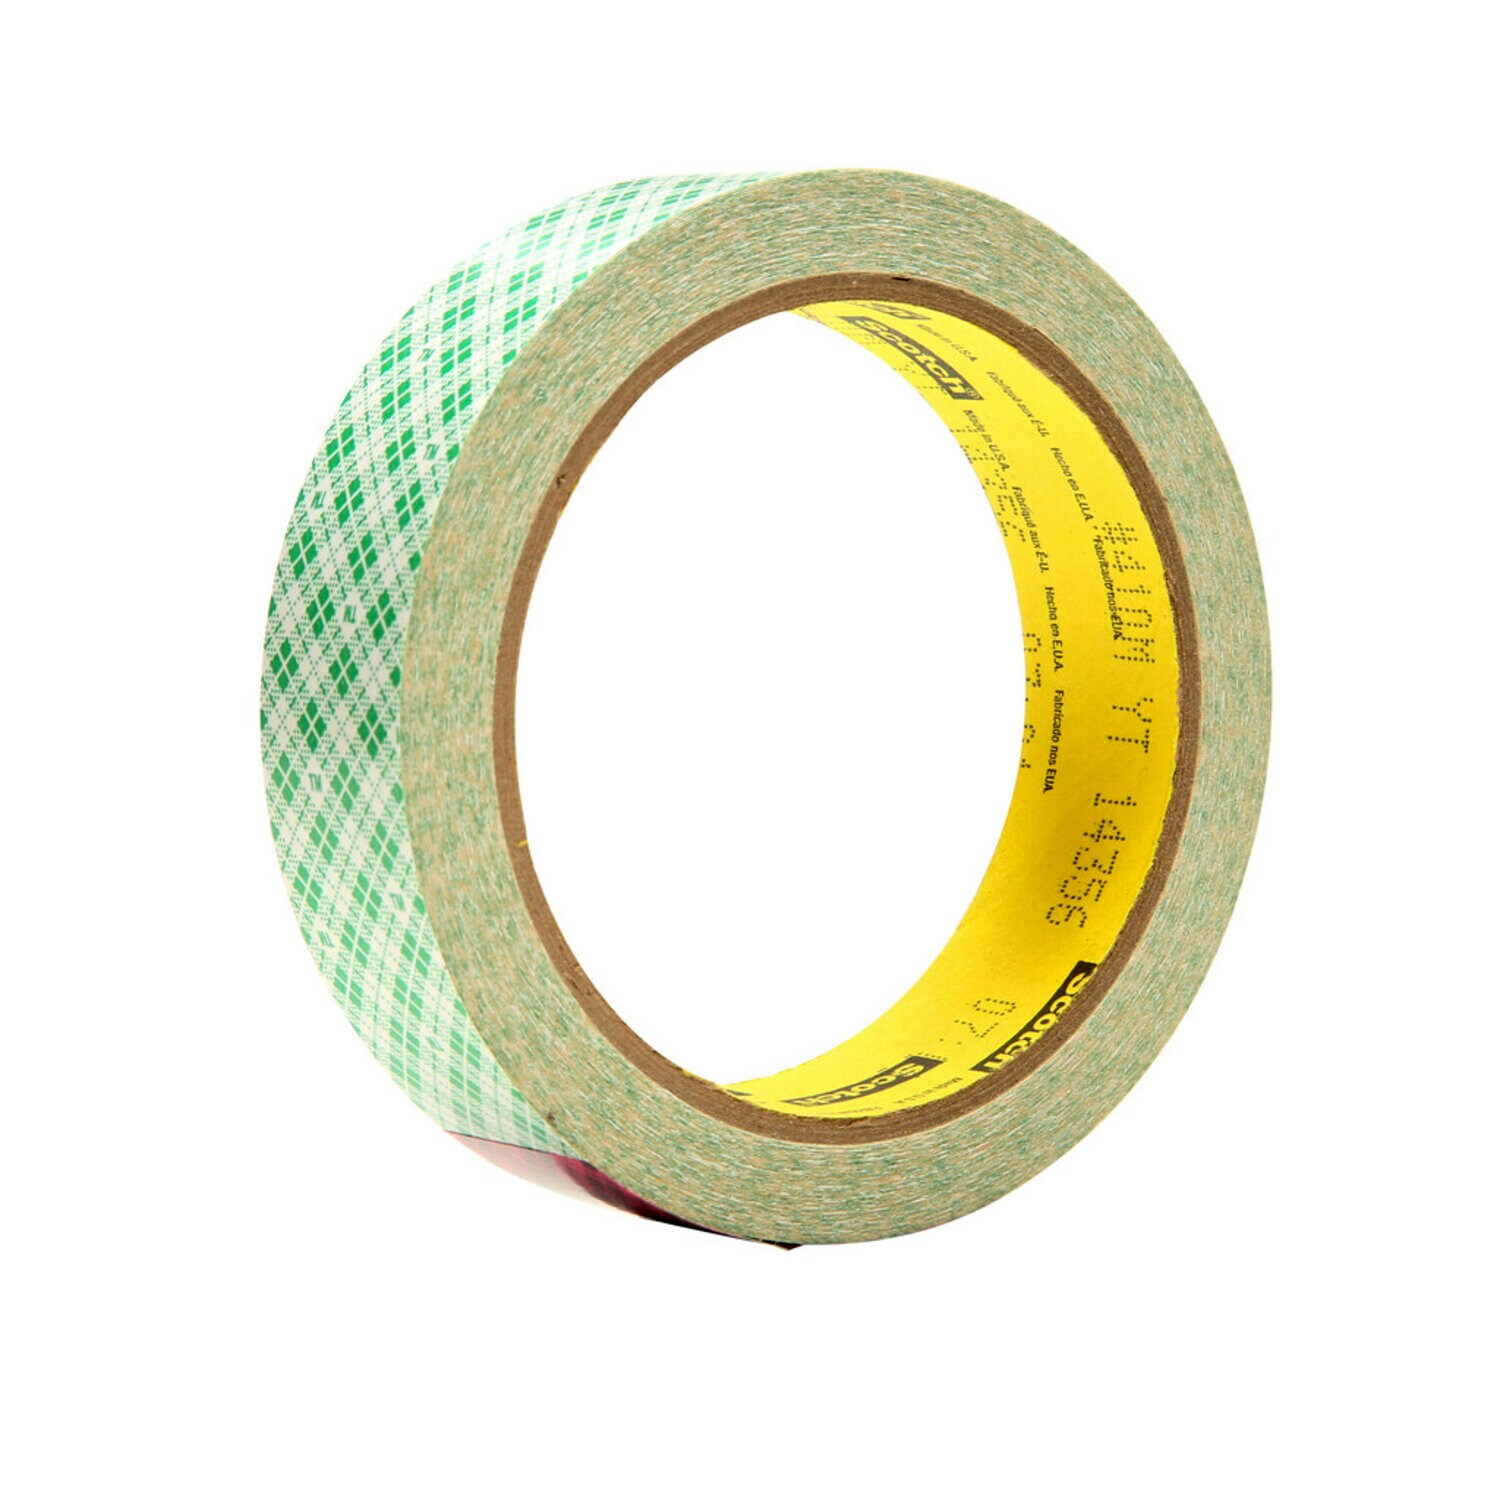 00051115319372 | 3M Double Coated Paper Tape 410M, Natural, 3/4 in